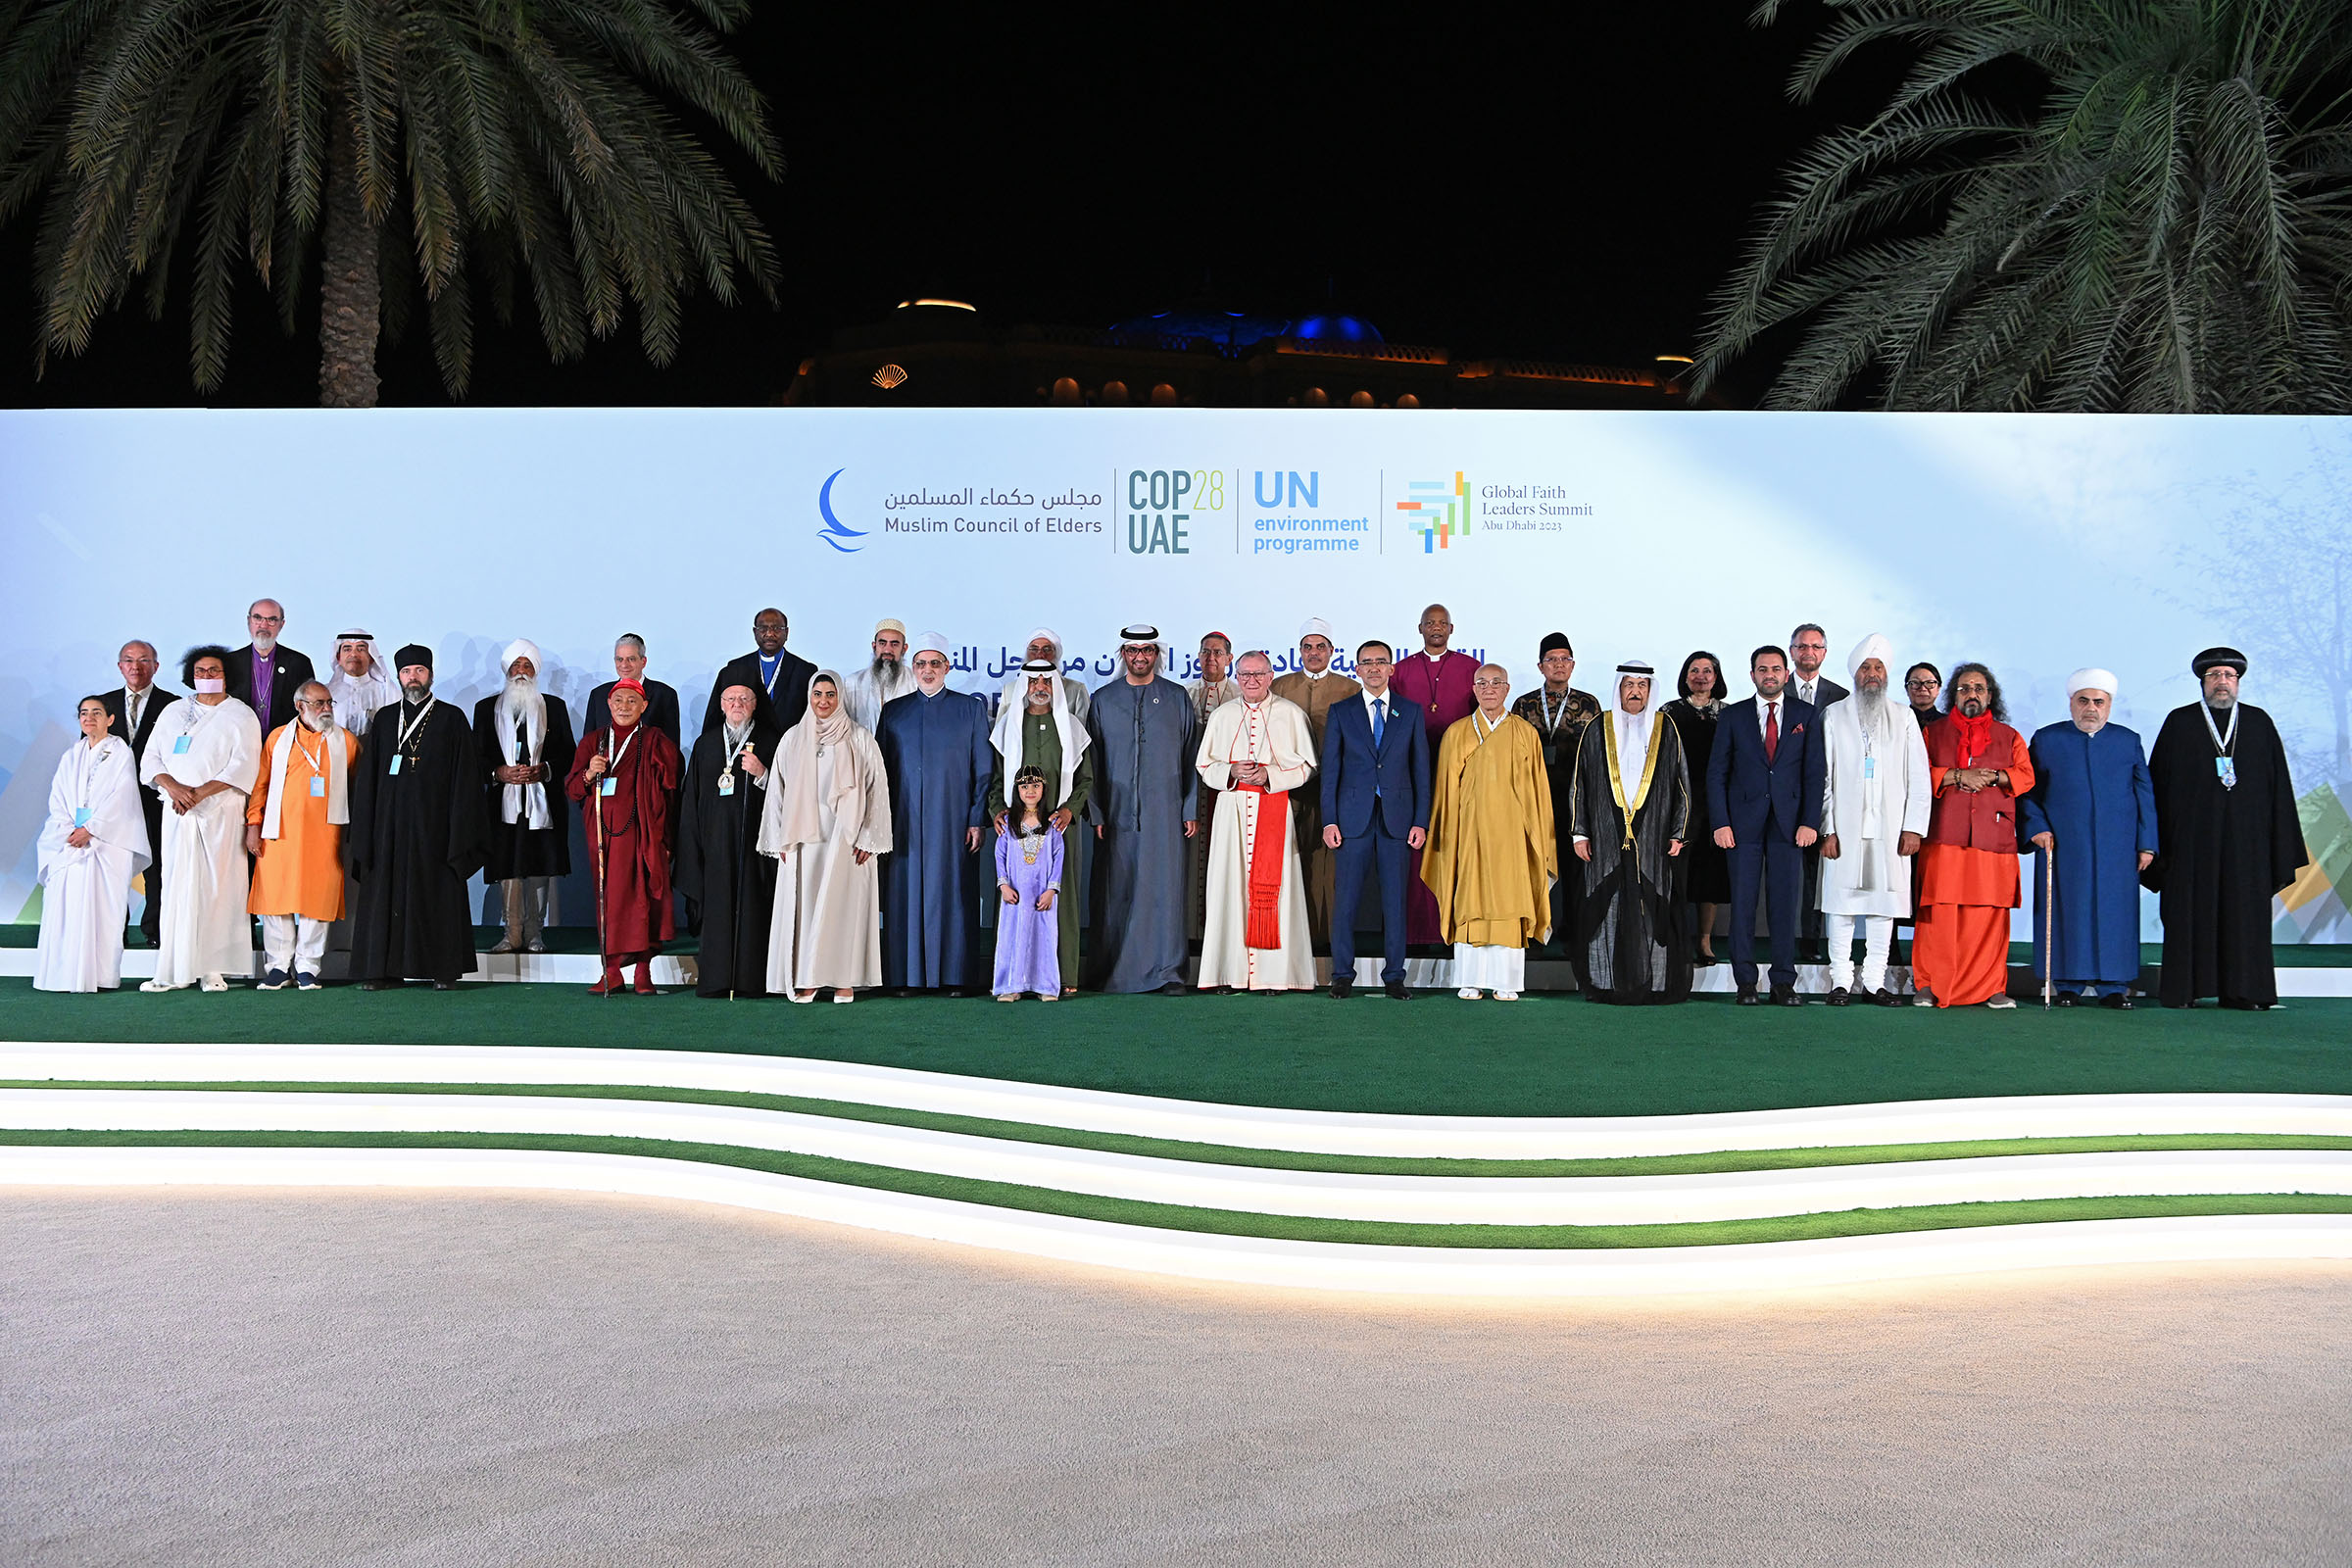 Participants in the Global Faith Leaders Summit pose together in Abu Dhabi. (Photo courtesy Muslim Council of Elders)